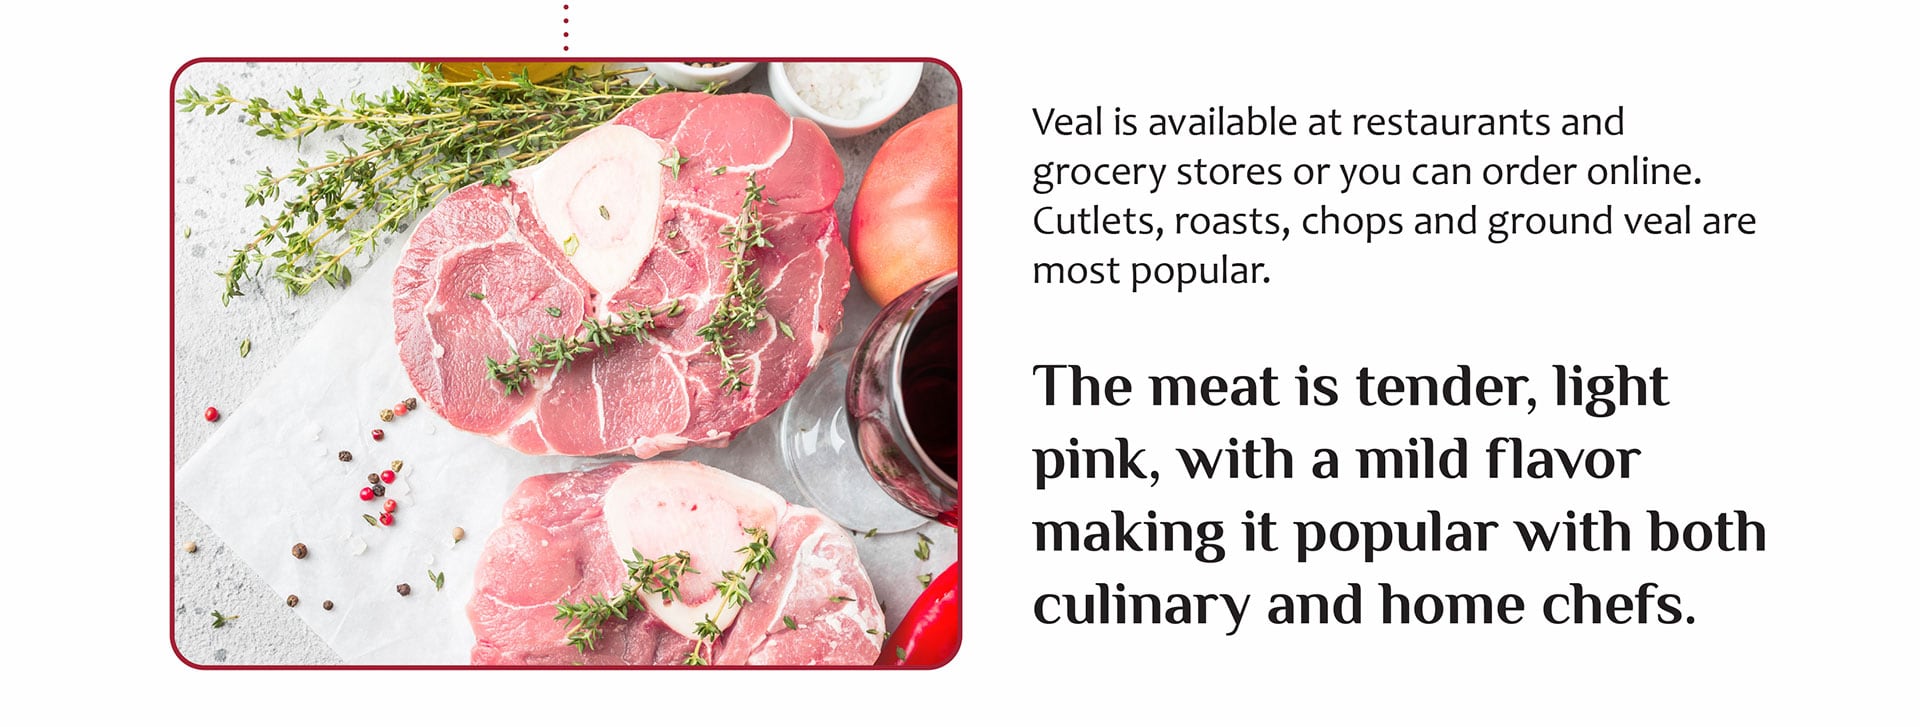 Veal is available at restaurants and grocery stores or you can order online. Cutlets, roasts, chops and ground veal are most popular.